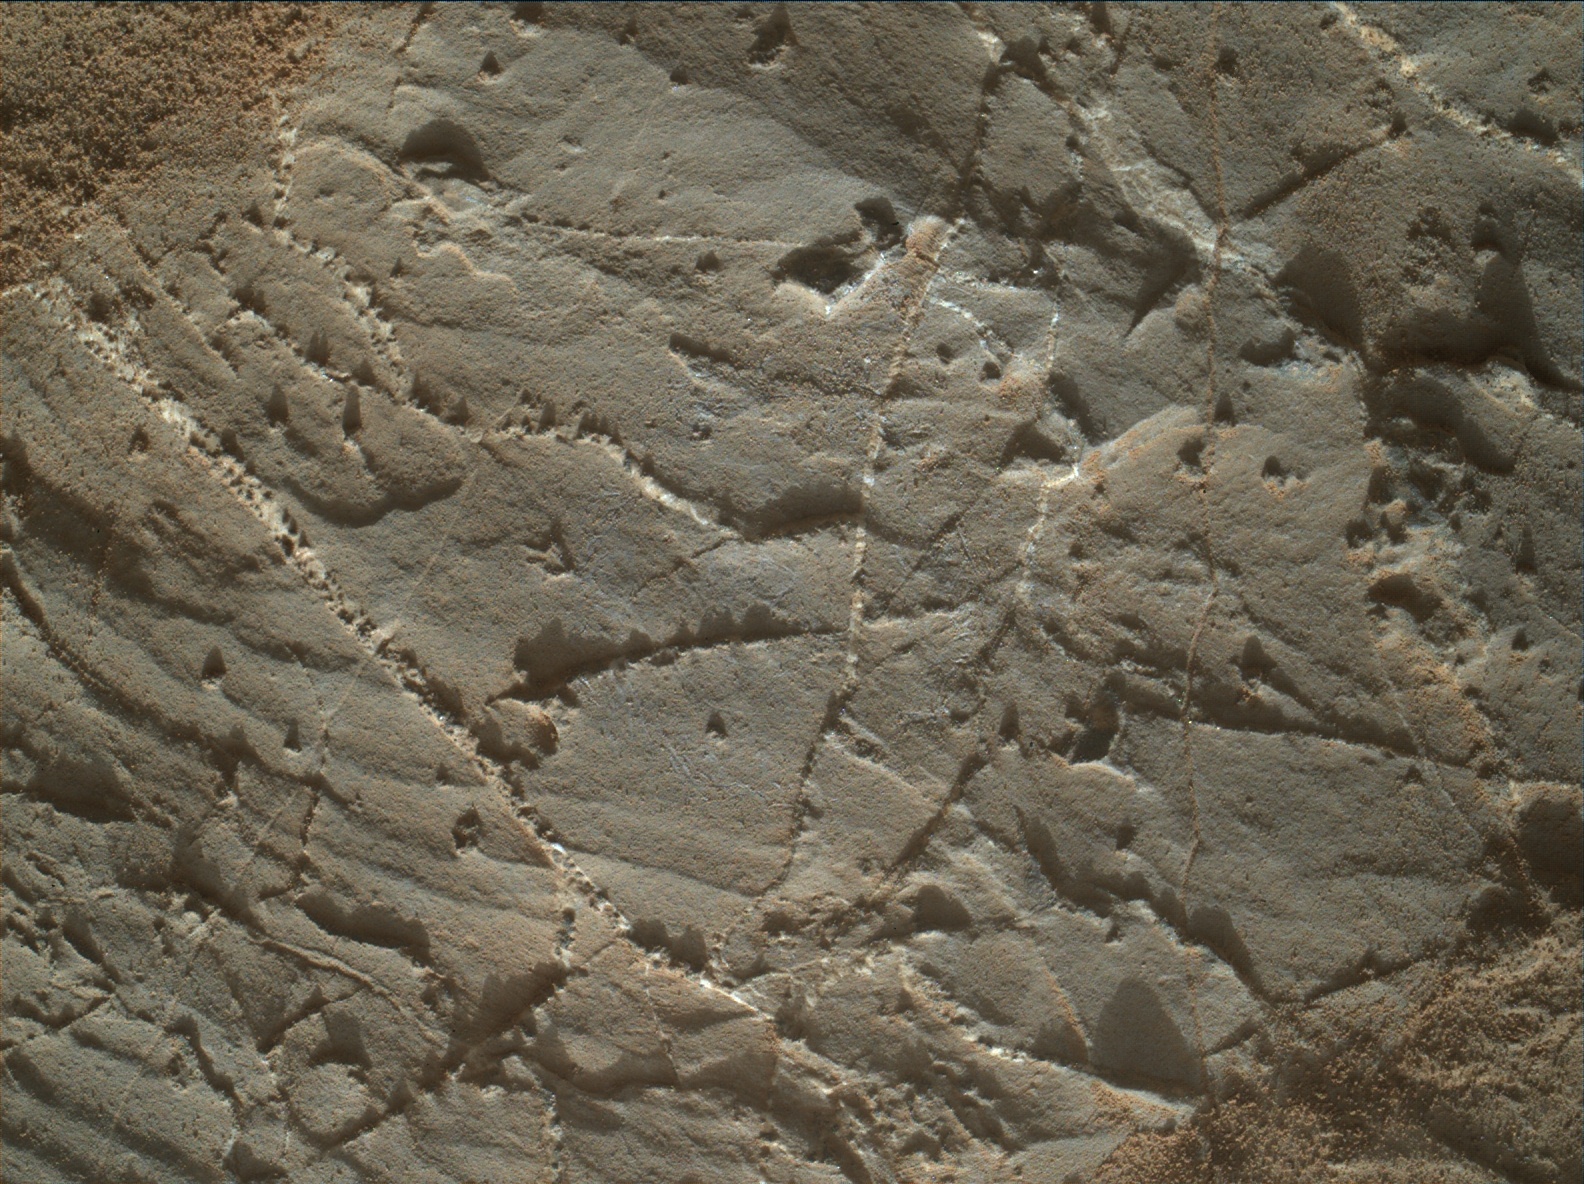 Nasa's Mars rover Curiosity acquired this image using its Mars Hand Lens Imager (MAHLI) on Sol 1967